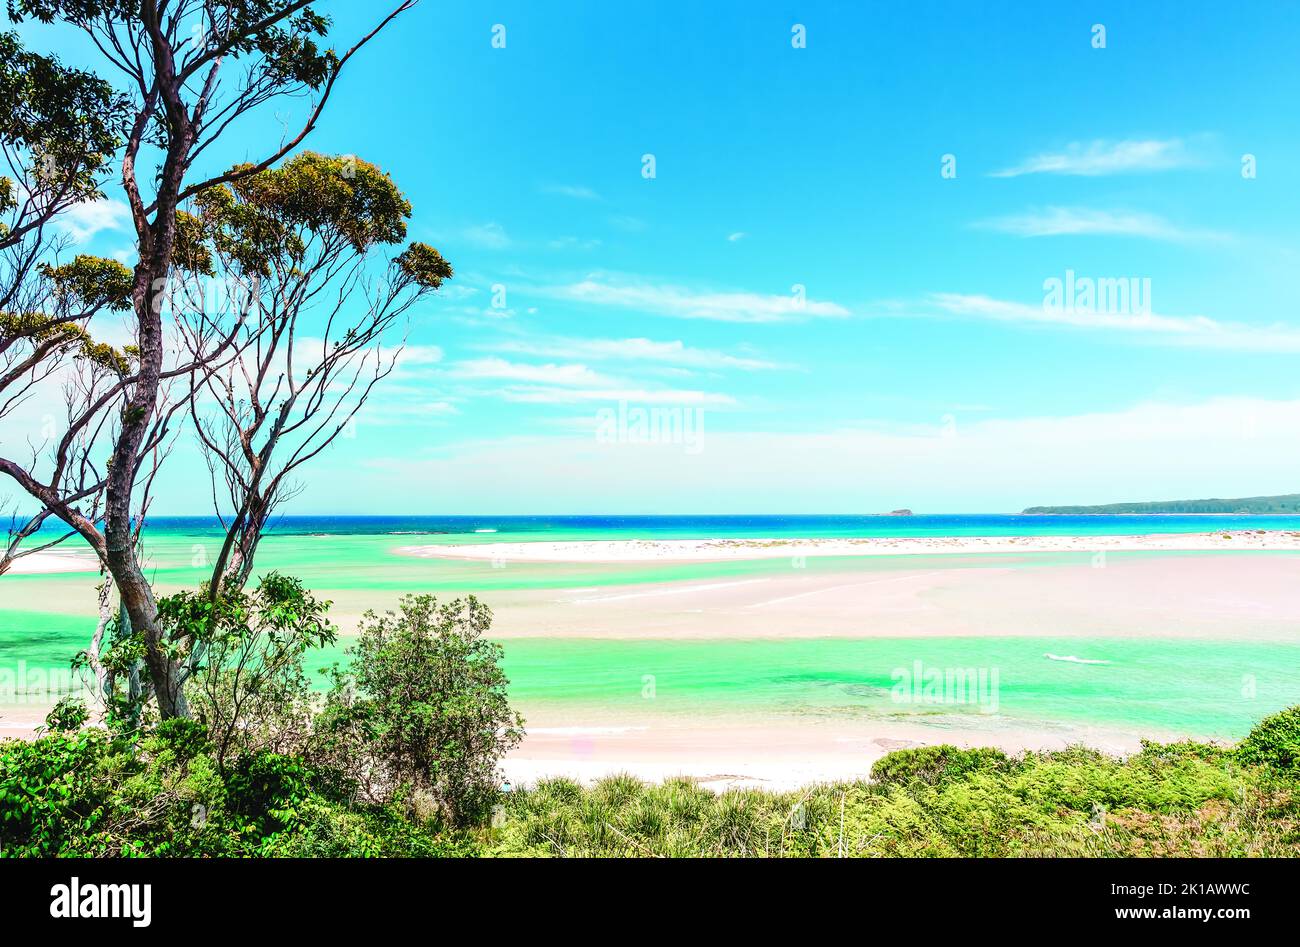 Swirling coastal inlet with tidal sands on a picturesque sunny day Stock Photo